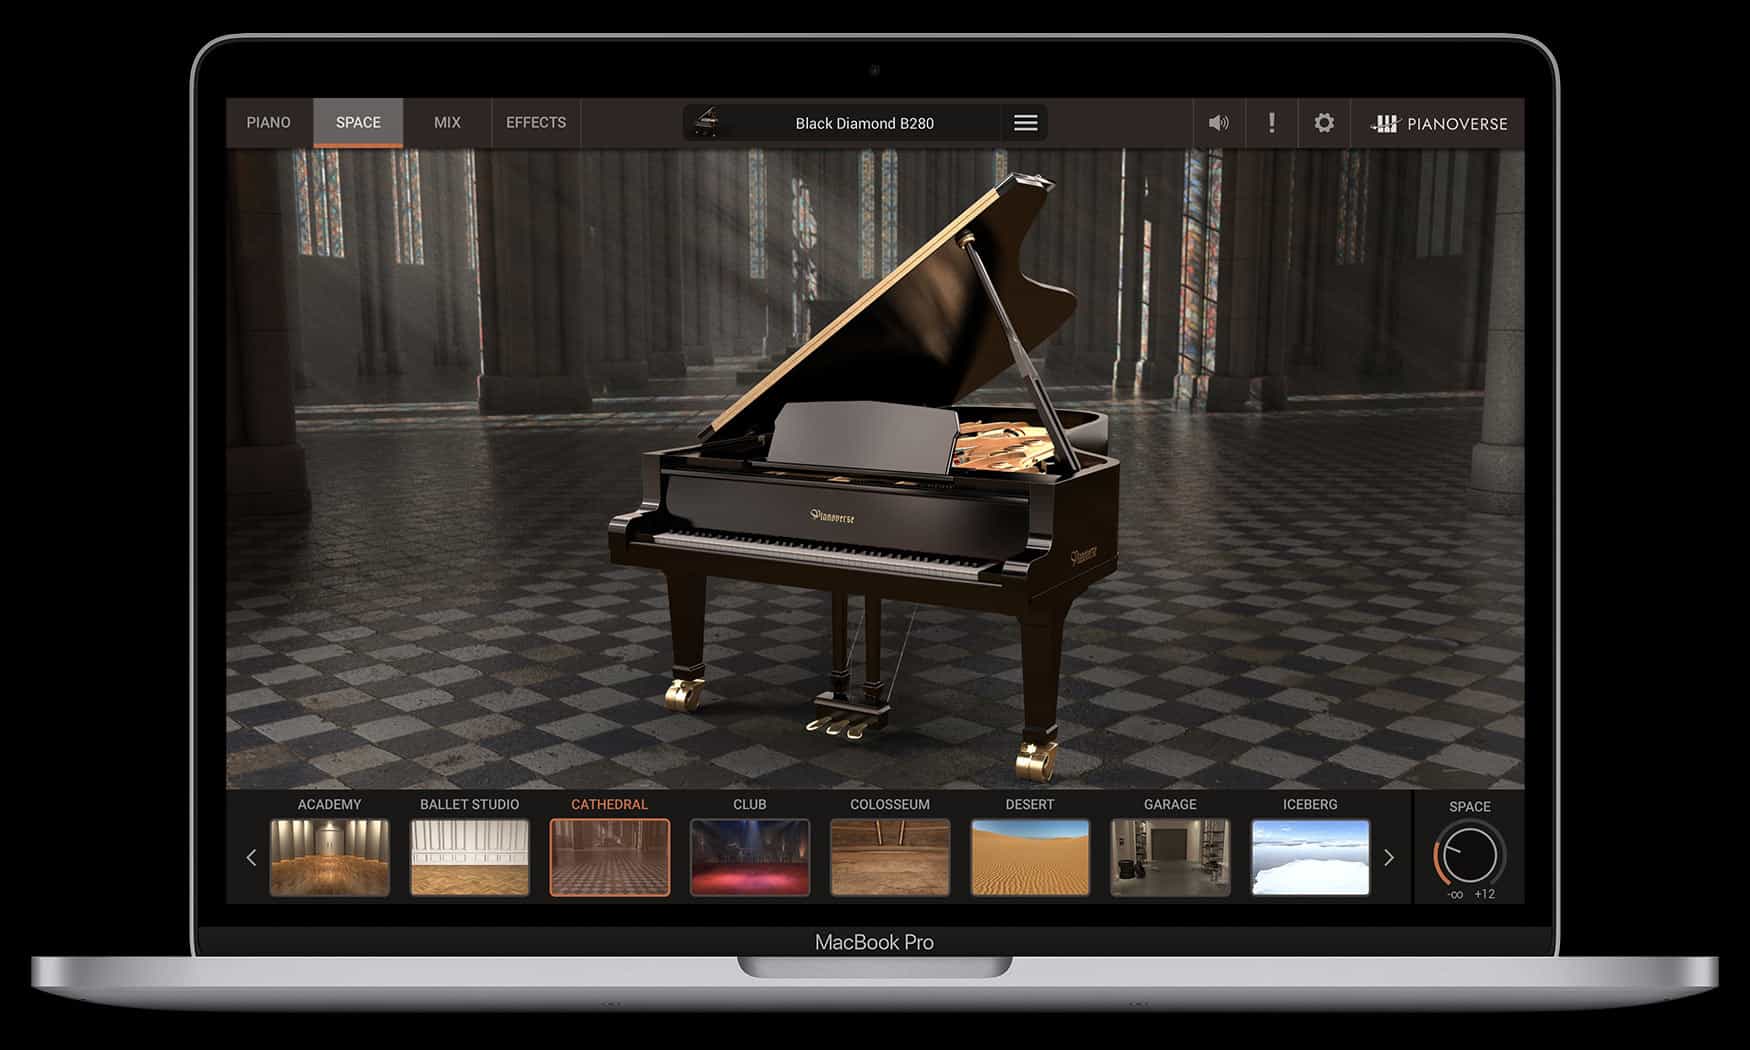 Macbook with Pianoverse GUI